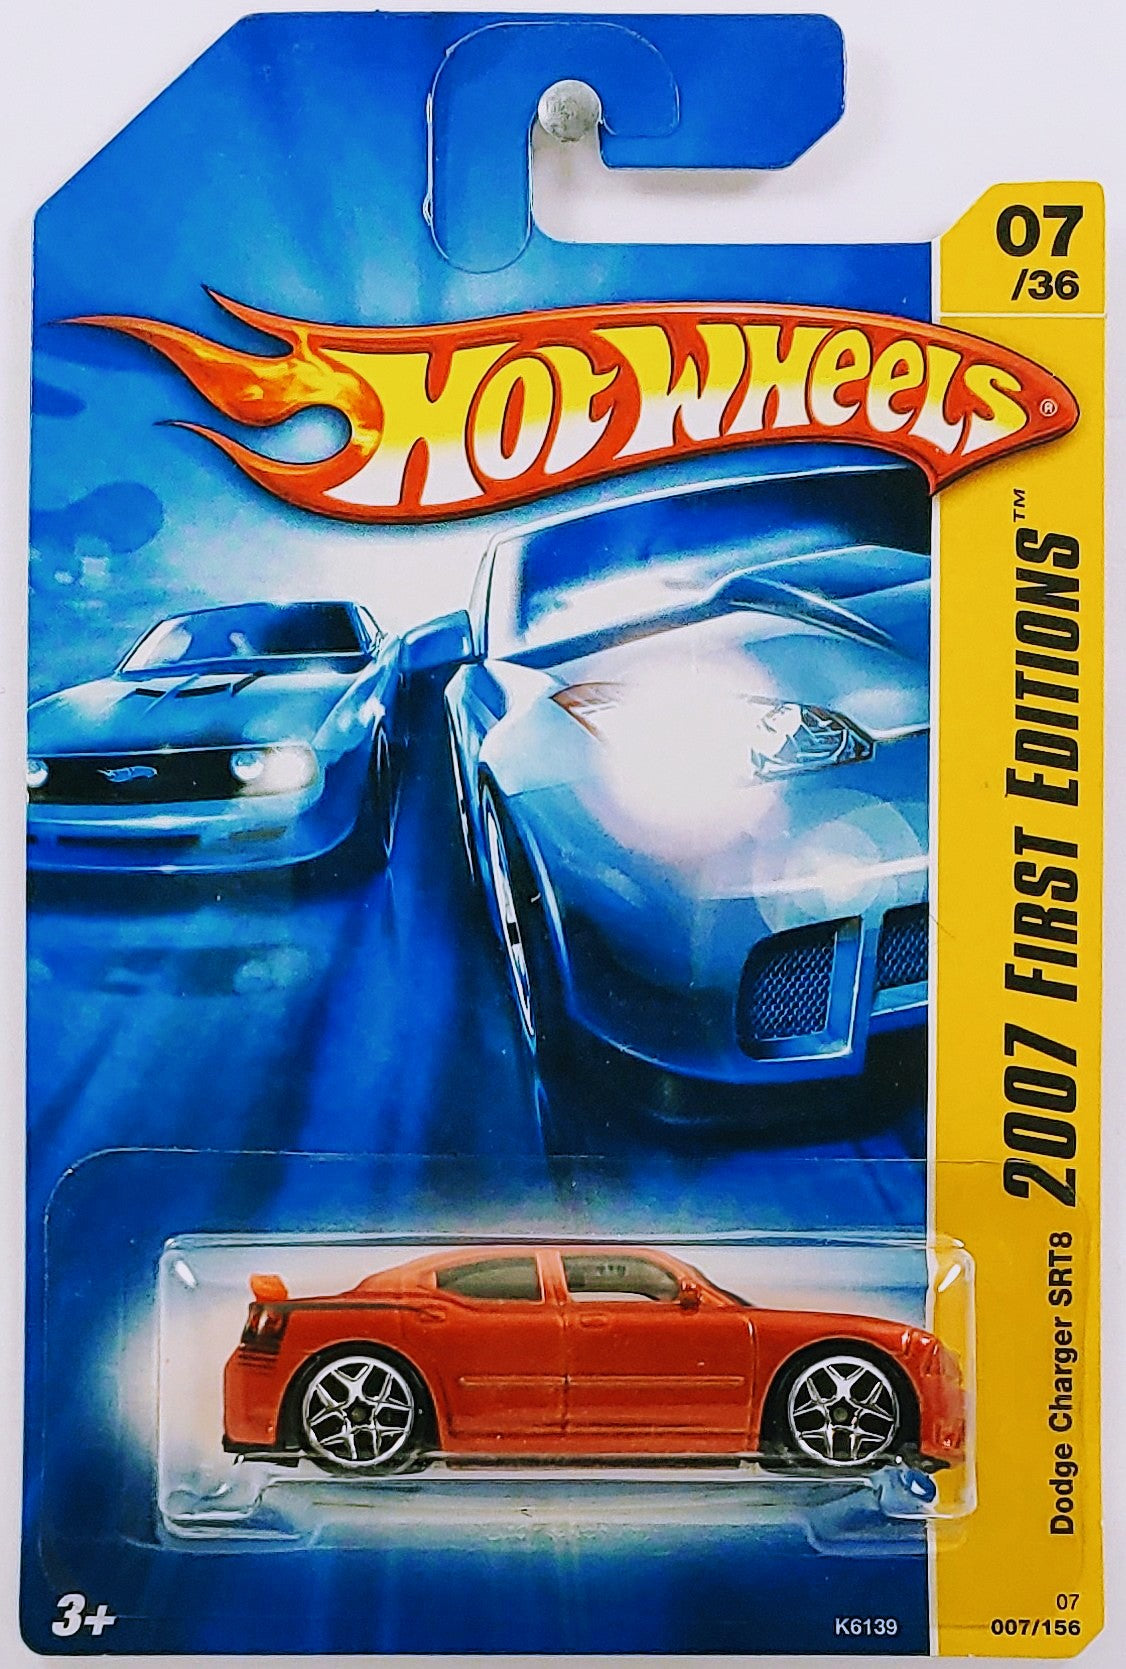 Hot Wheels 2007 - Collector # 007/156 - First Editions 07/36 - Dodge Charger SRT8 - Metallic Orange - Orange Rear Wing - IC